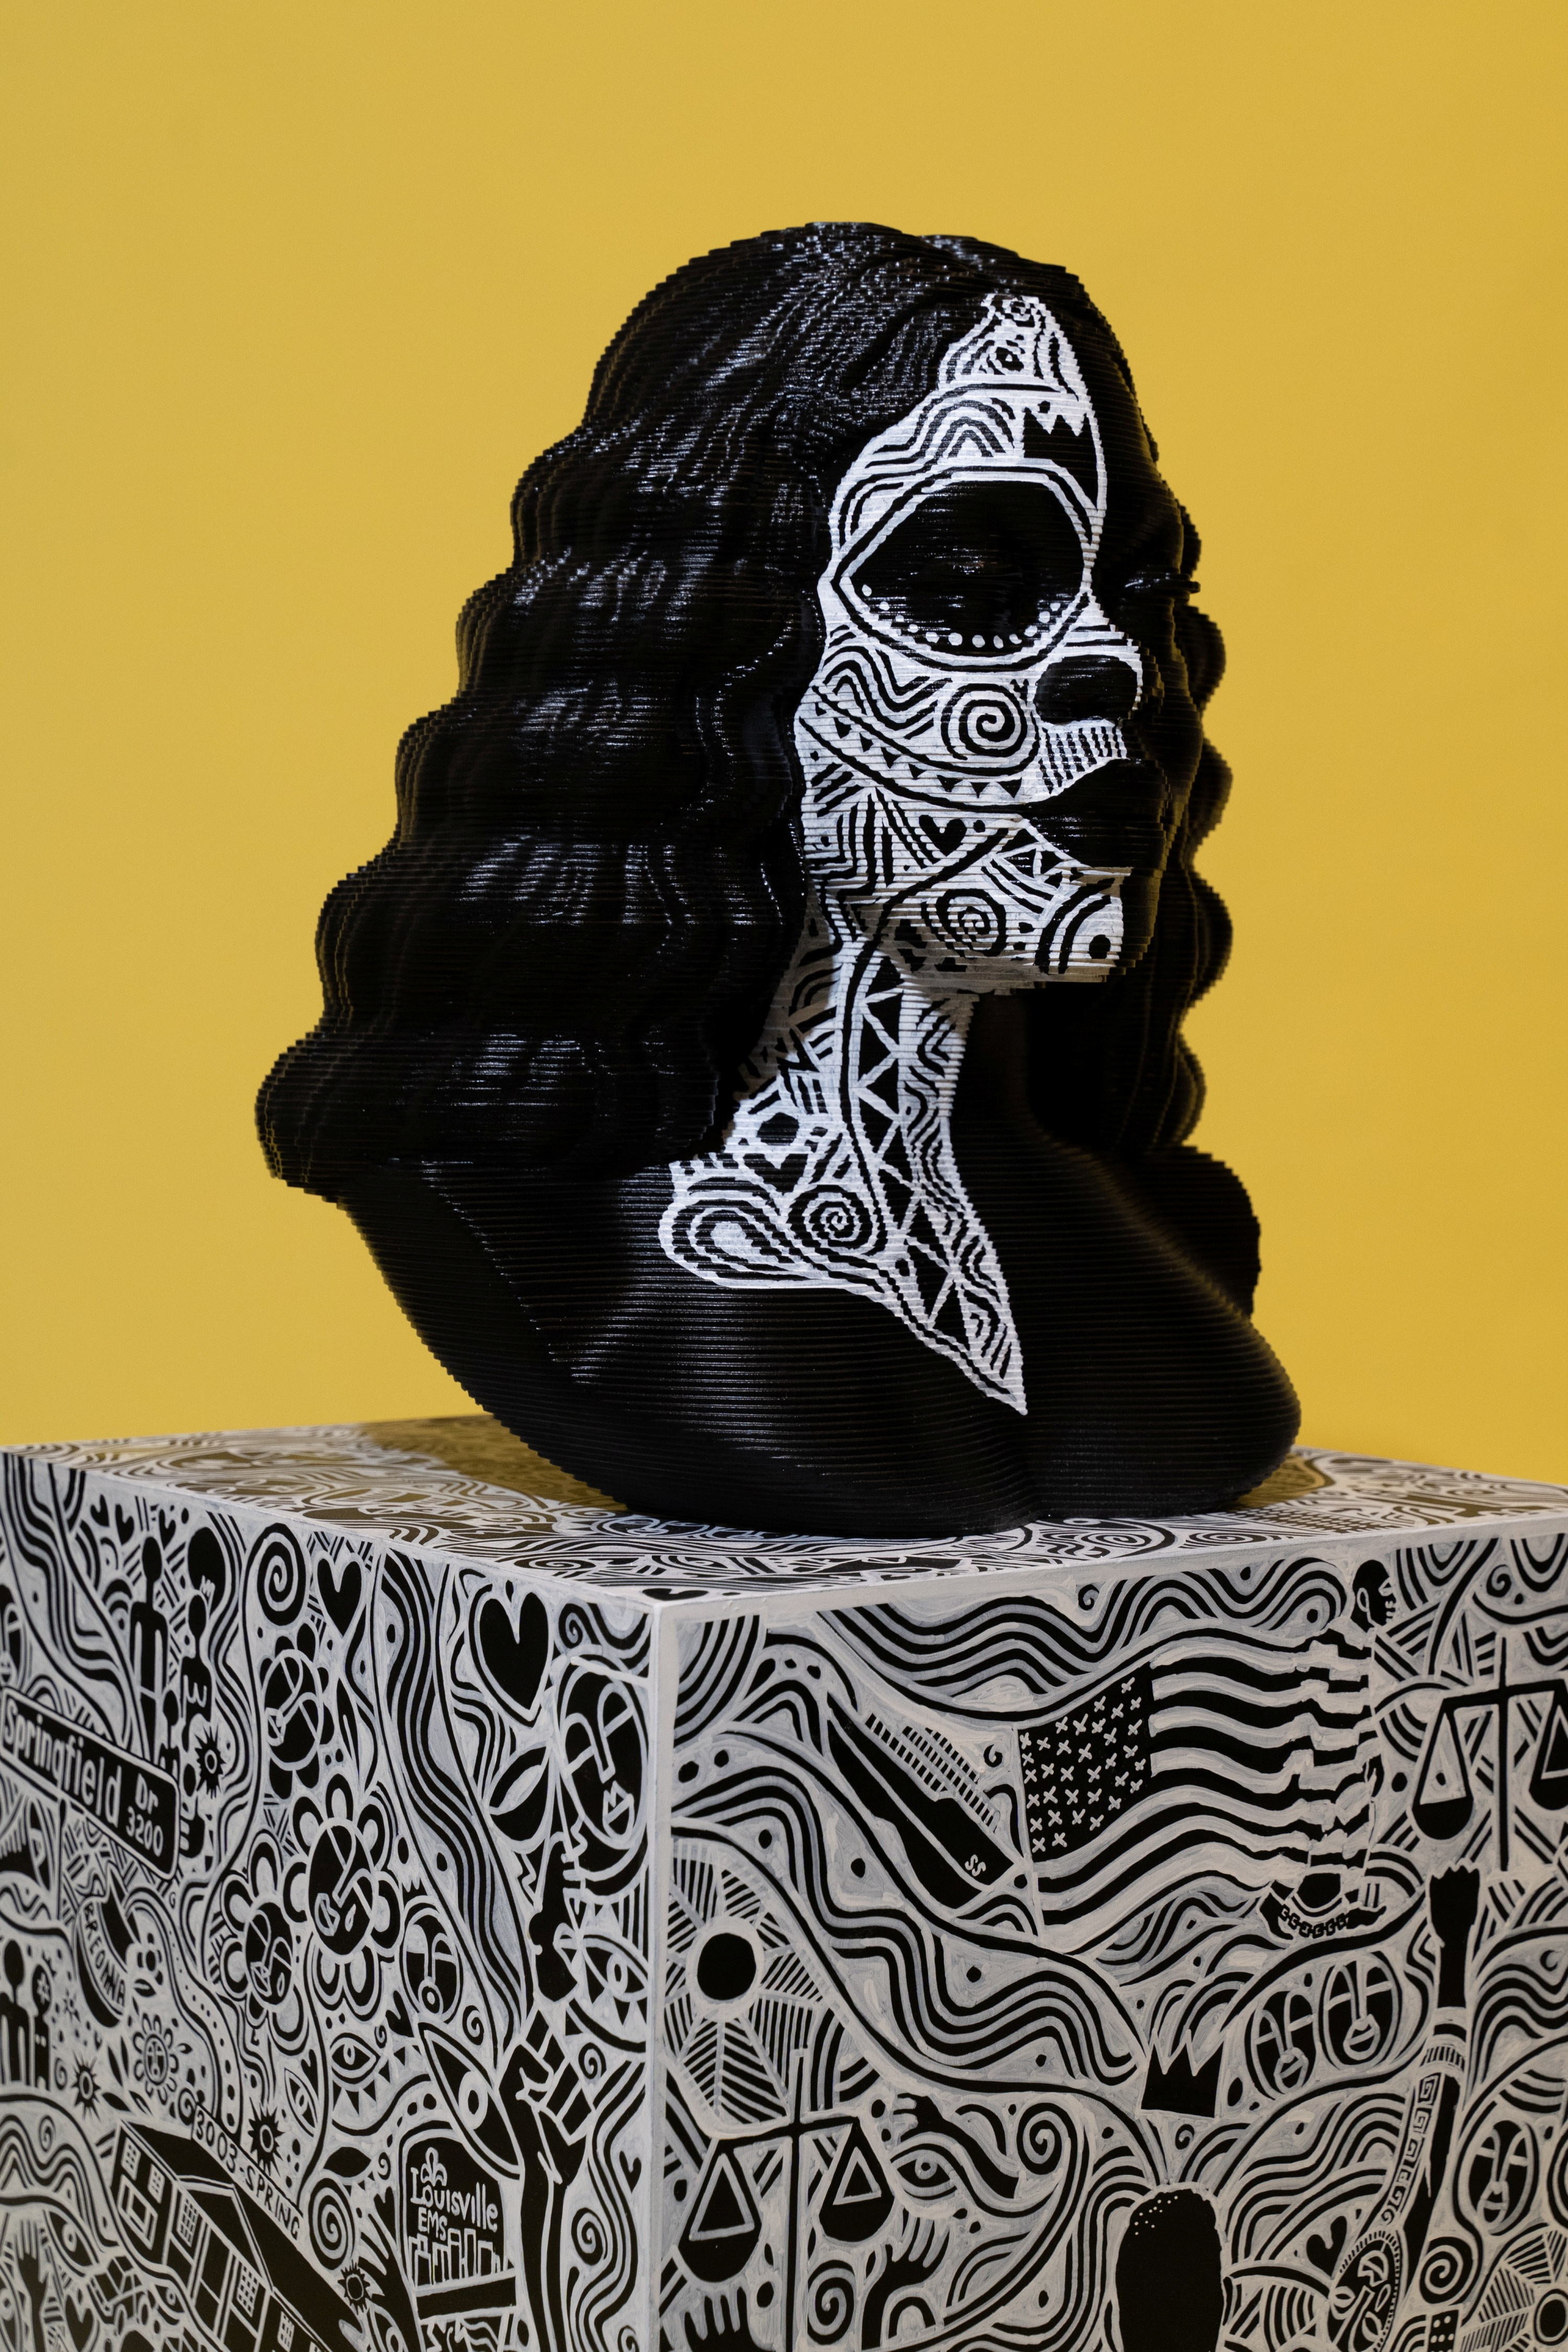 A sculpture by Chris Carnabuci and Laolu of Breonna Taylor, the Black woman shot and killed during a police raid on her Kentucky, U.S., apartment in March 2020, is seen in an undated photo ahead of an auction at Sotheby's in New York, U.S.  Chris Carnabucci, Laolu NYC and Sotheby's/Handout via REUTERS